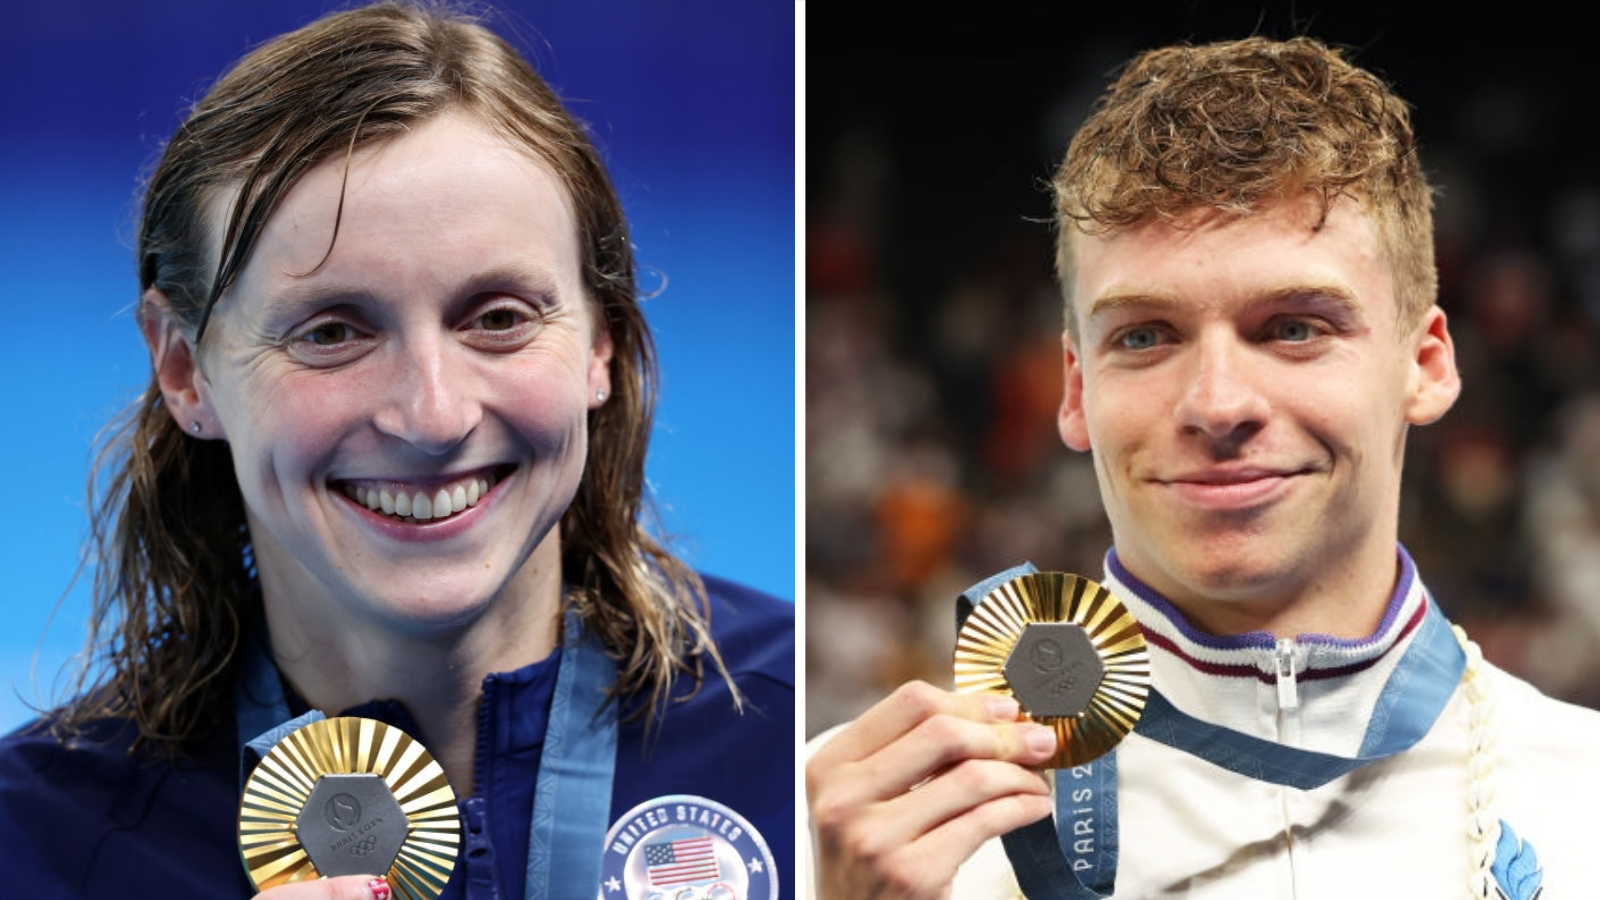 Marchand & Ledecky make history on epic night in the pool